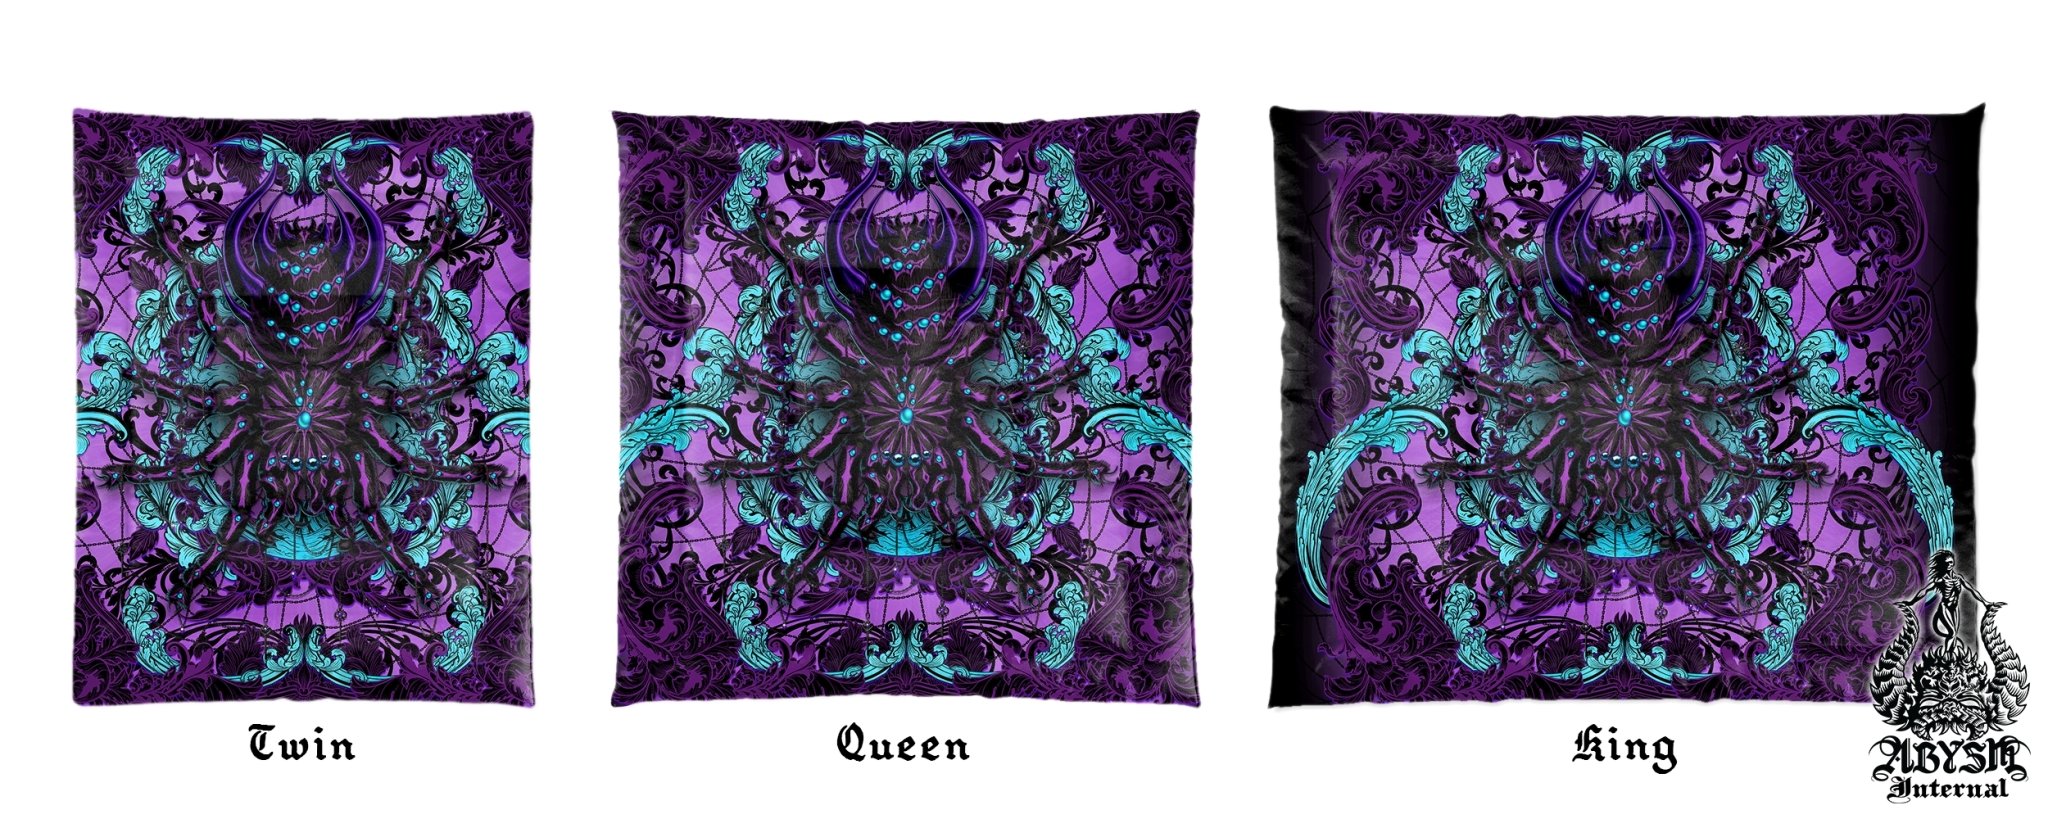 Pastel Goth Bedding Set, Comforter and Duvet, Bed Cover and Bedroom Decor, King, Queen and Twin Size - Tarantula Spider Black and Purple - Abysm Internal